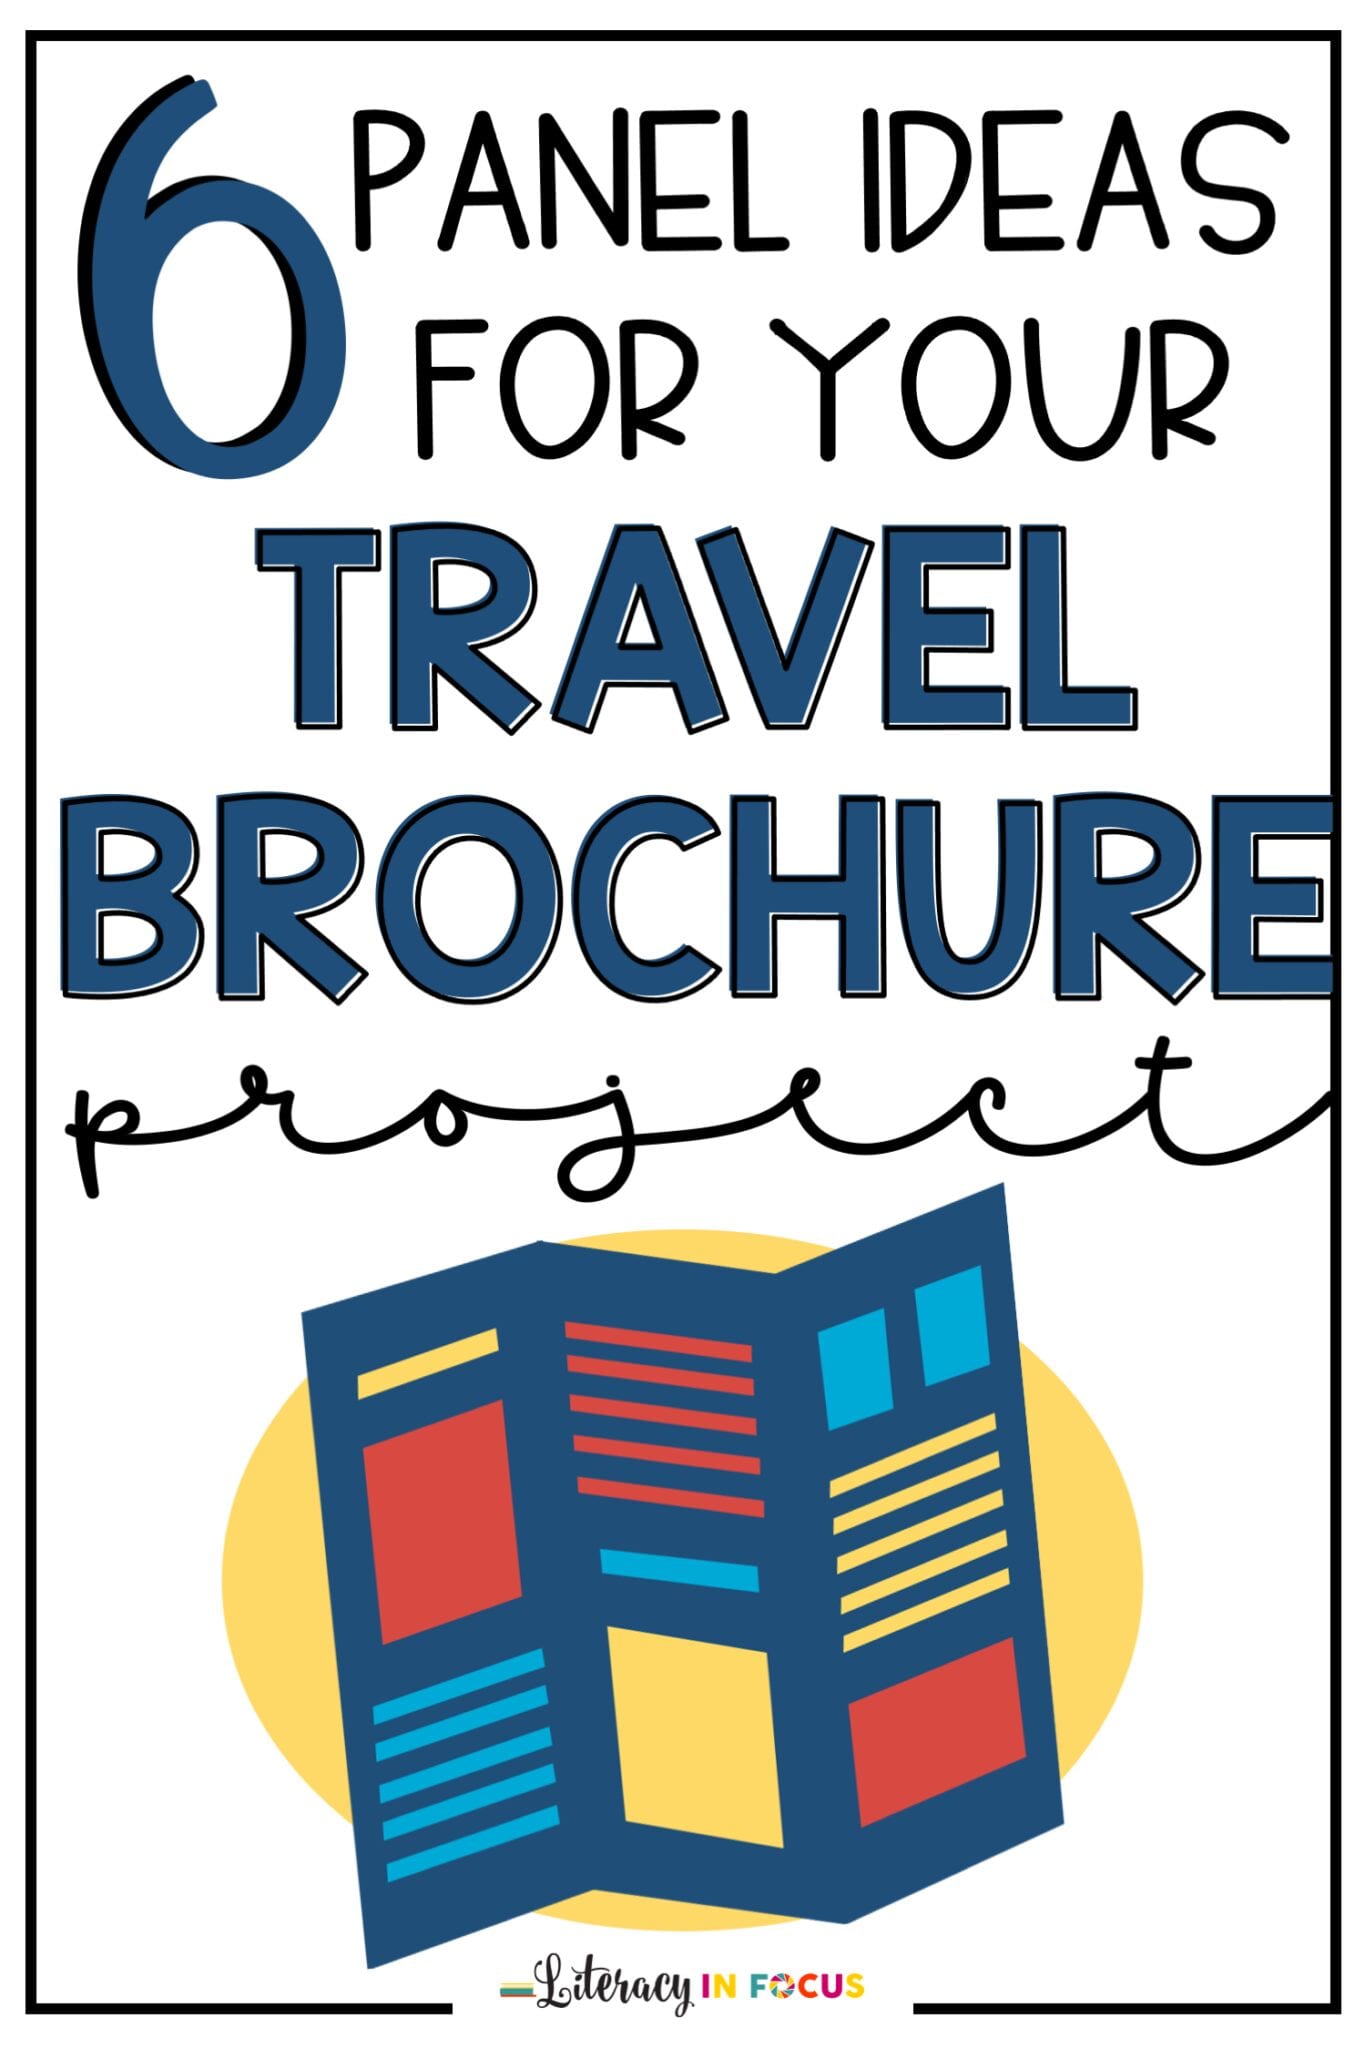 Travel Brochure Project Ideas for Students